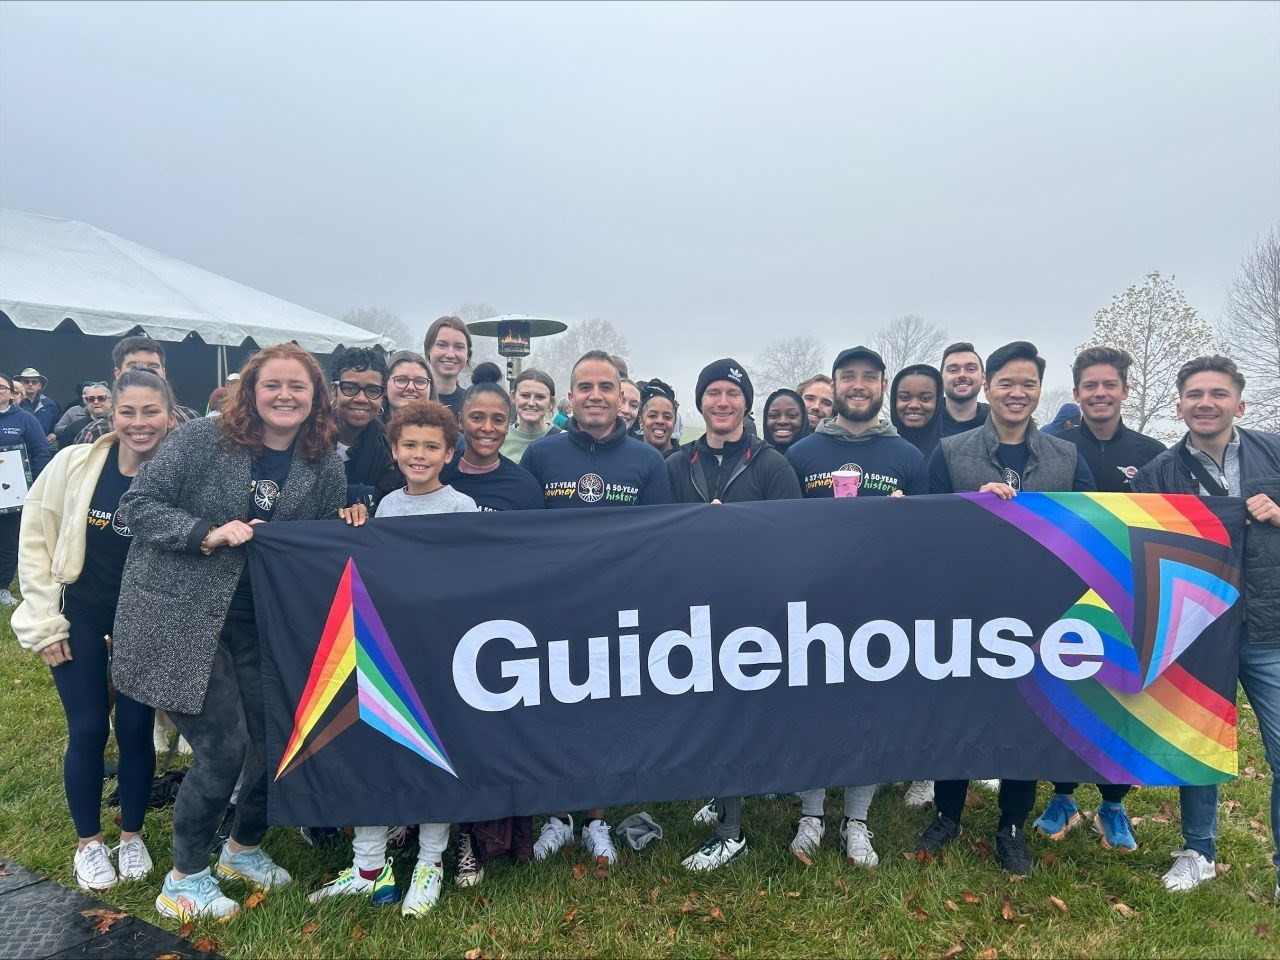 Guidehouse volunteers at the Whitman-Walker Health Walk to end HIV